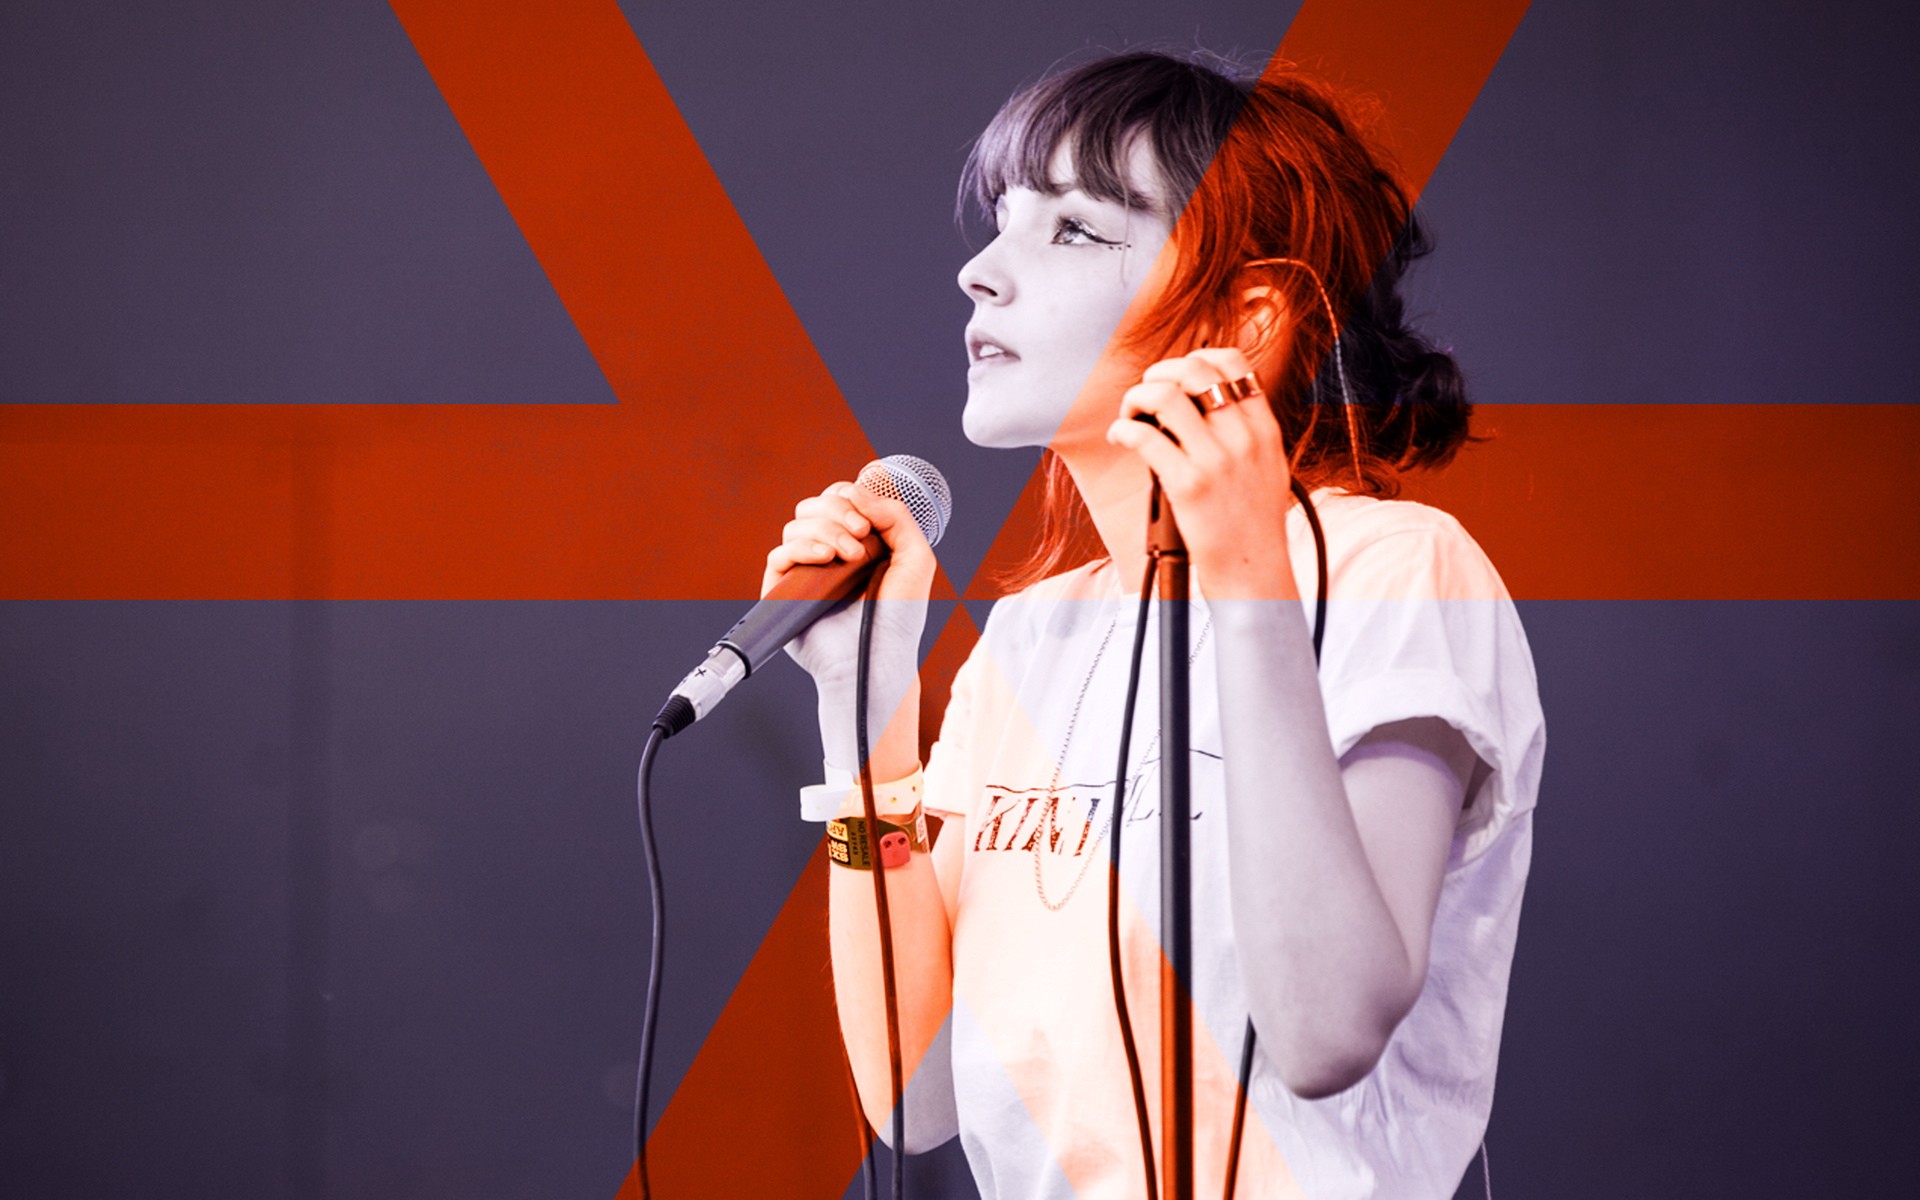 People 1920x1200 Chvrches Lauren Mayberry singer women T-shirt white tops microphone music